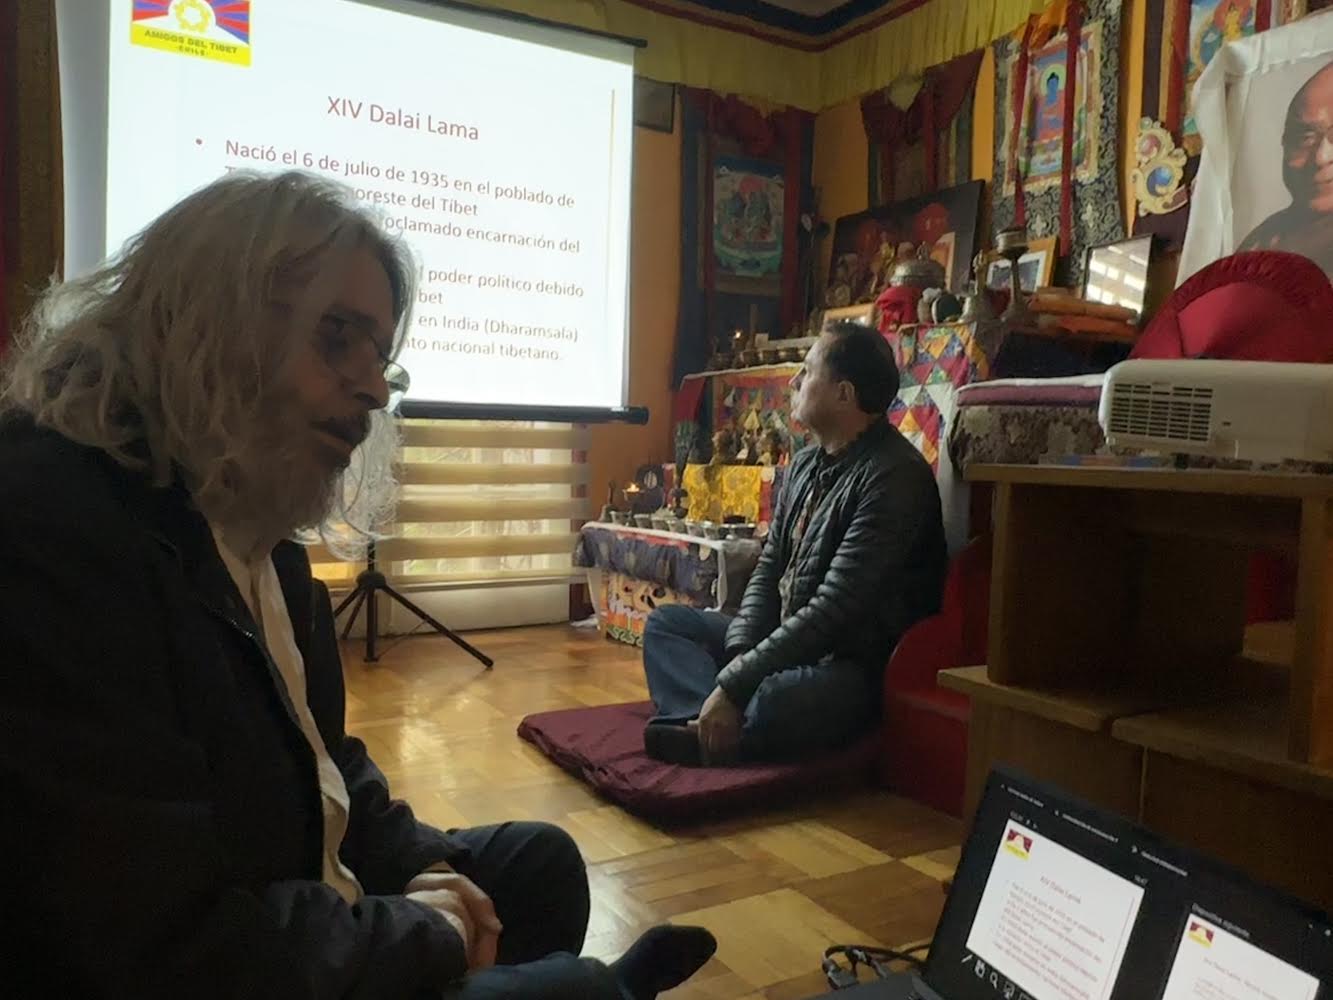 Tibet House Brazil Successfully Concluded Cognitively Based Compassion  Training - Central Tibetan Administration